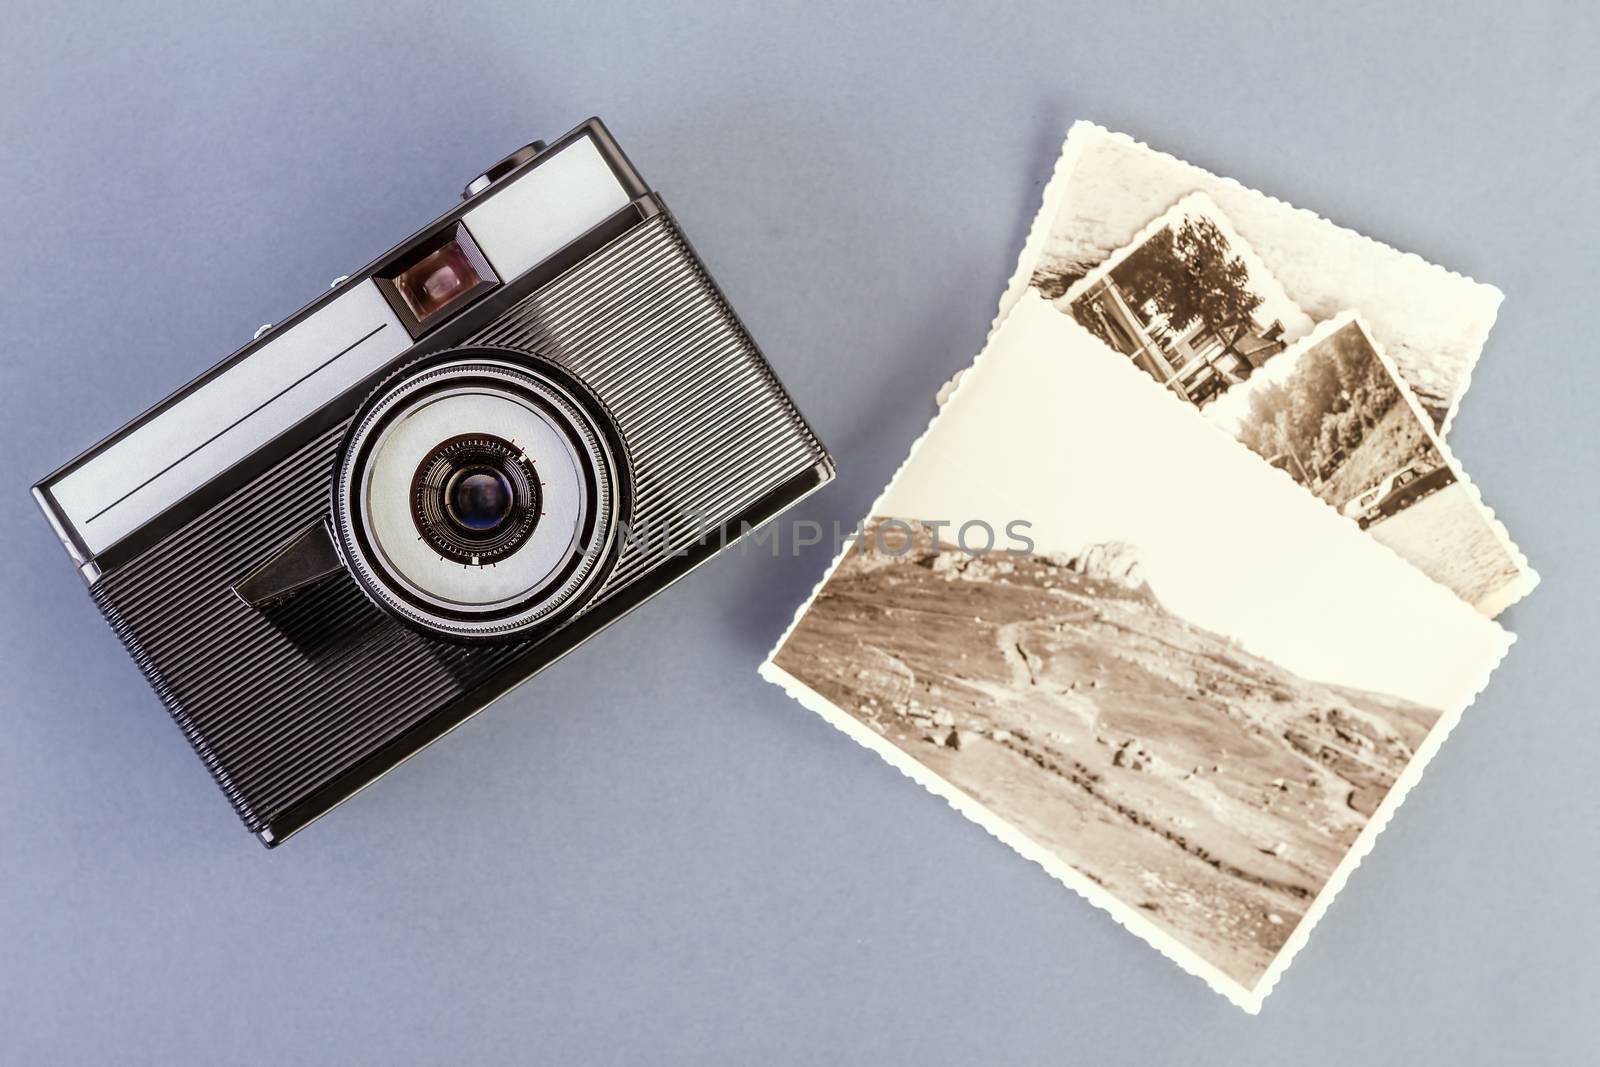 Vintage photo camera and old photos on a gray table by manaemedia